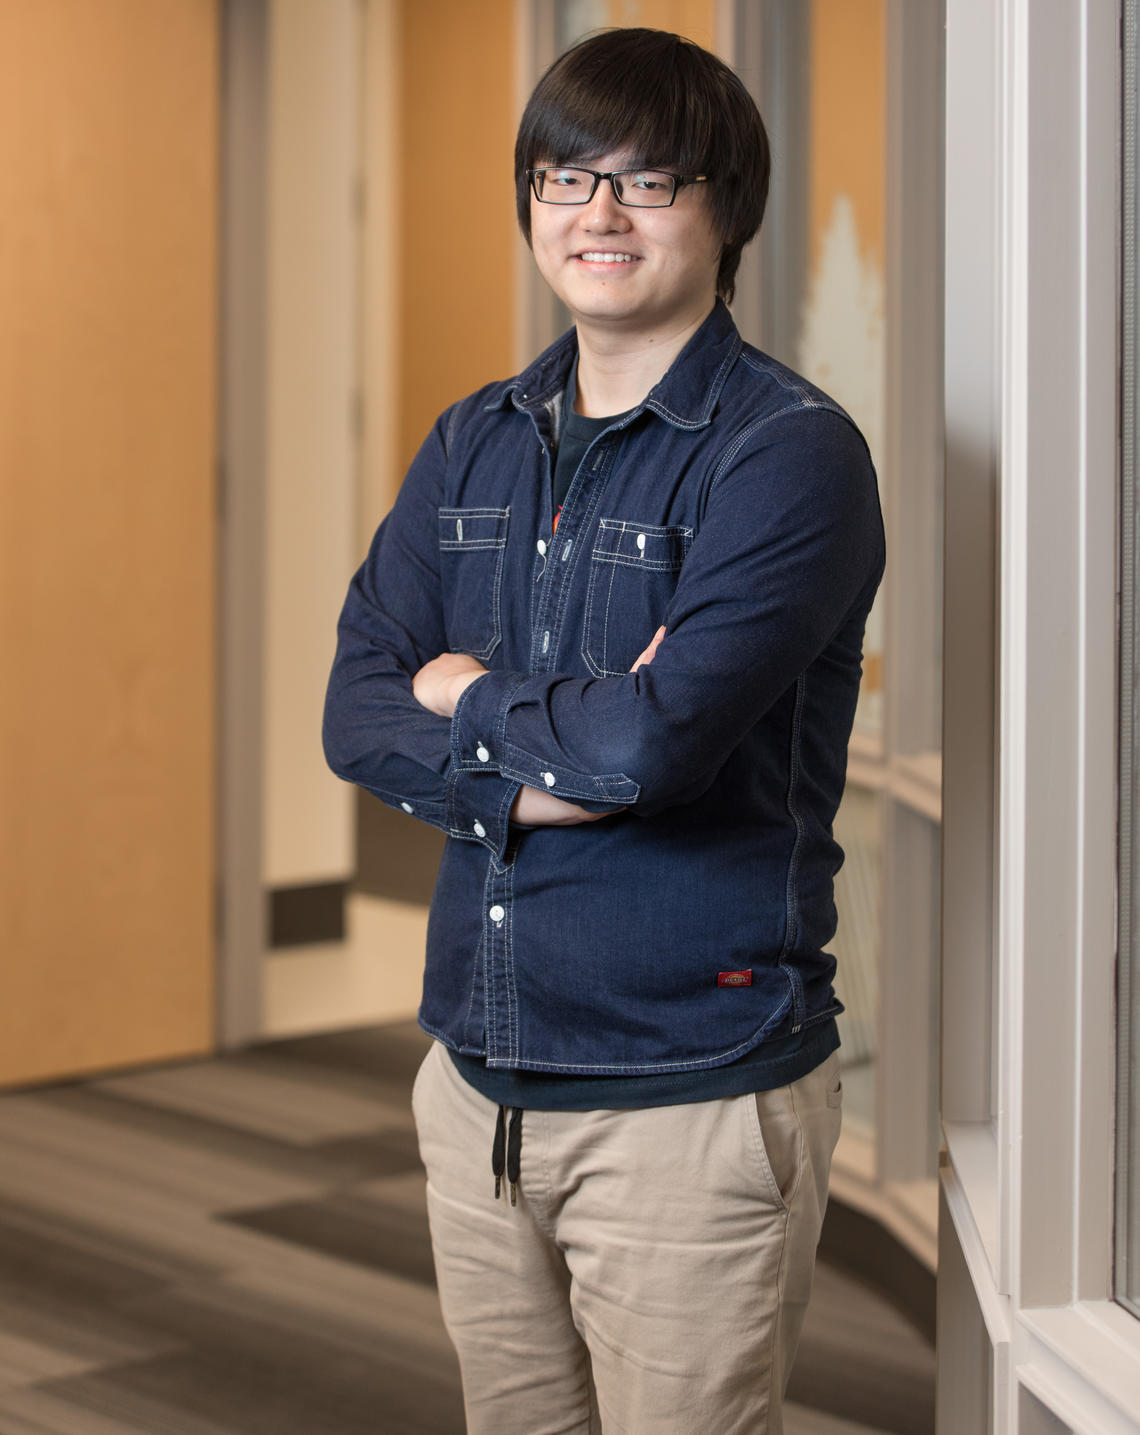 Graduating geoscience student Haoze Zhang says the support he received throughout his years at UCalgary inspired him to join the Science Mentorship Program to help other international students.